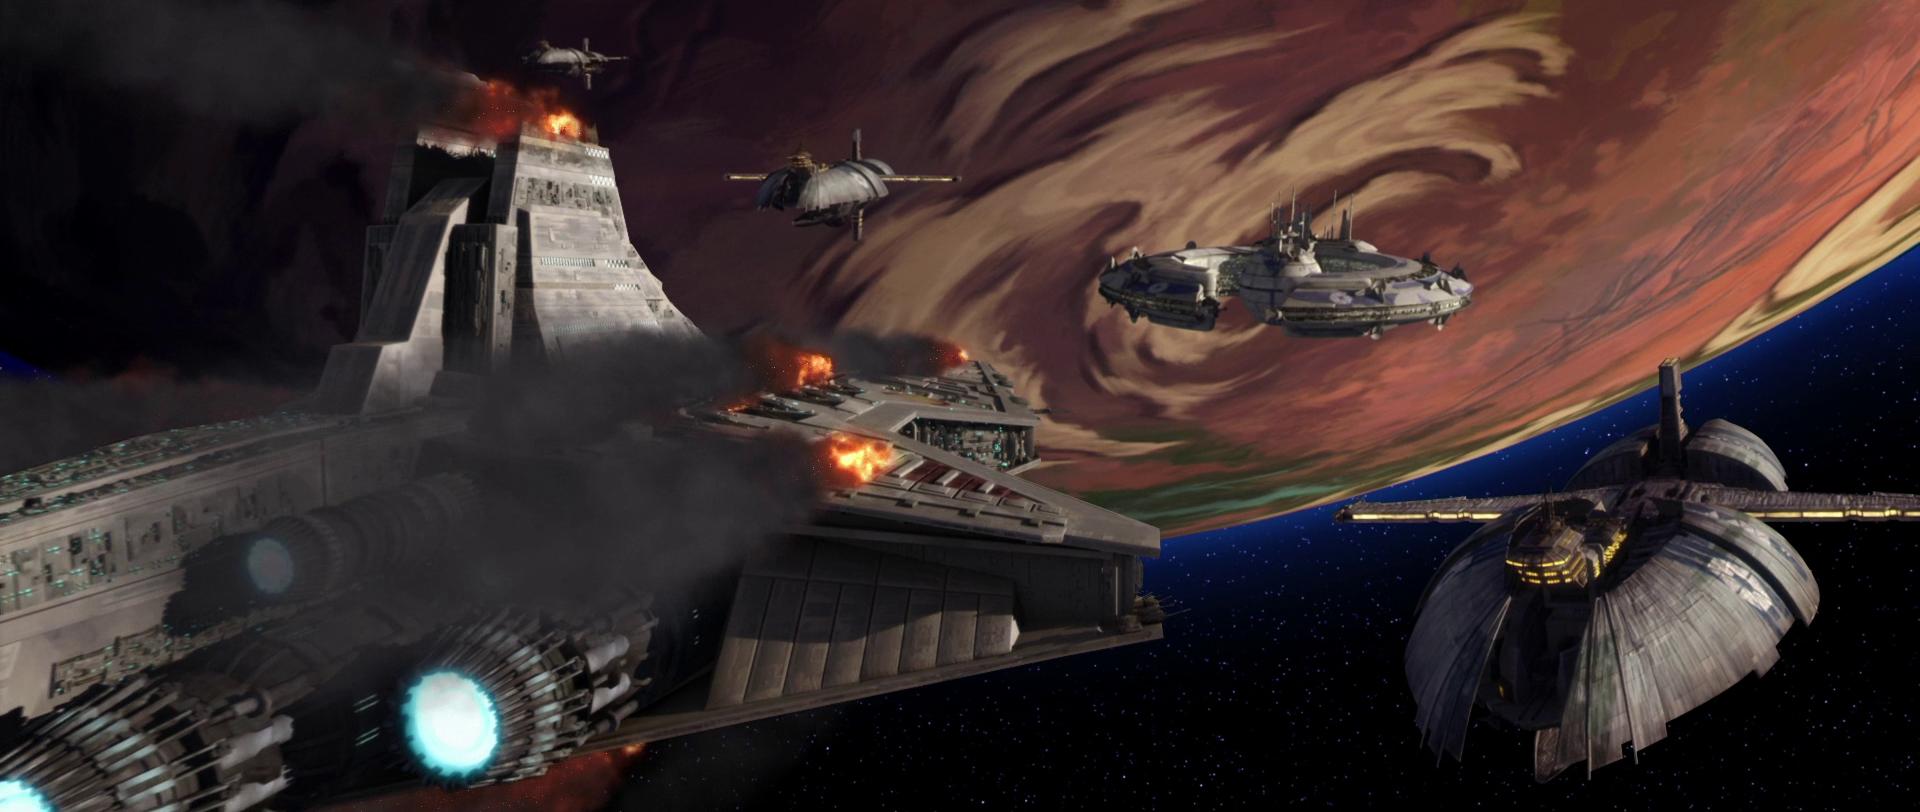 Star Wars: The Clone Wars Storm Over Ryloth (TV Episode 2009)